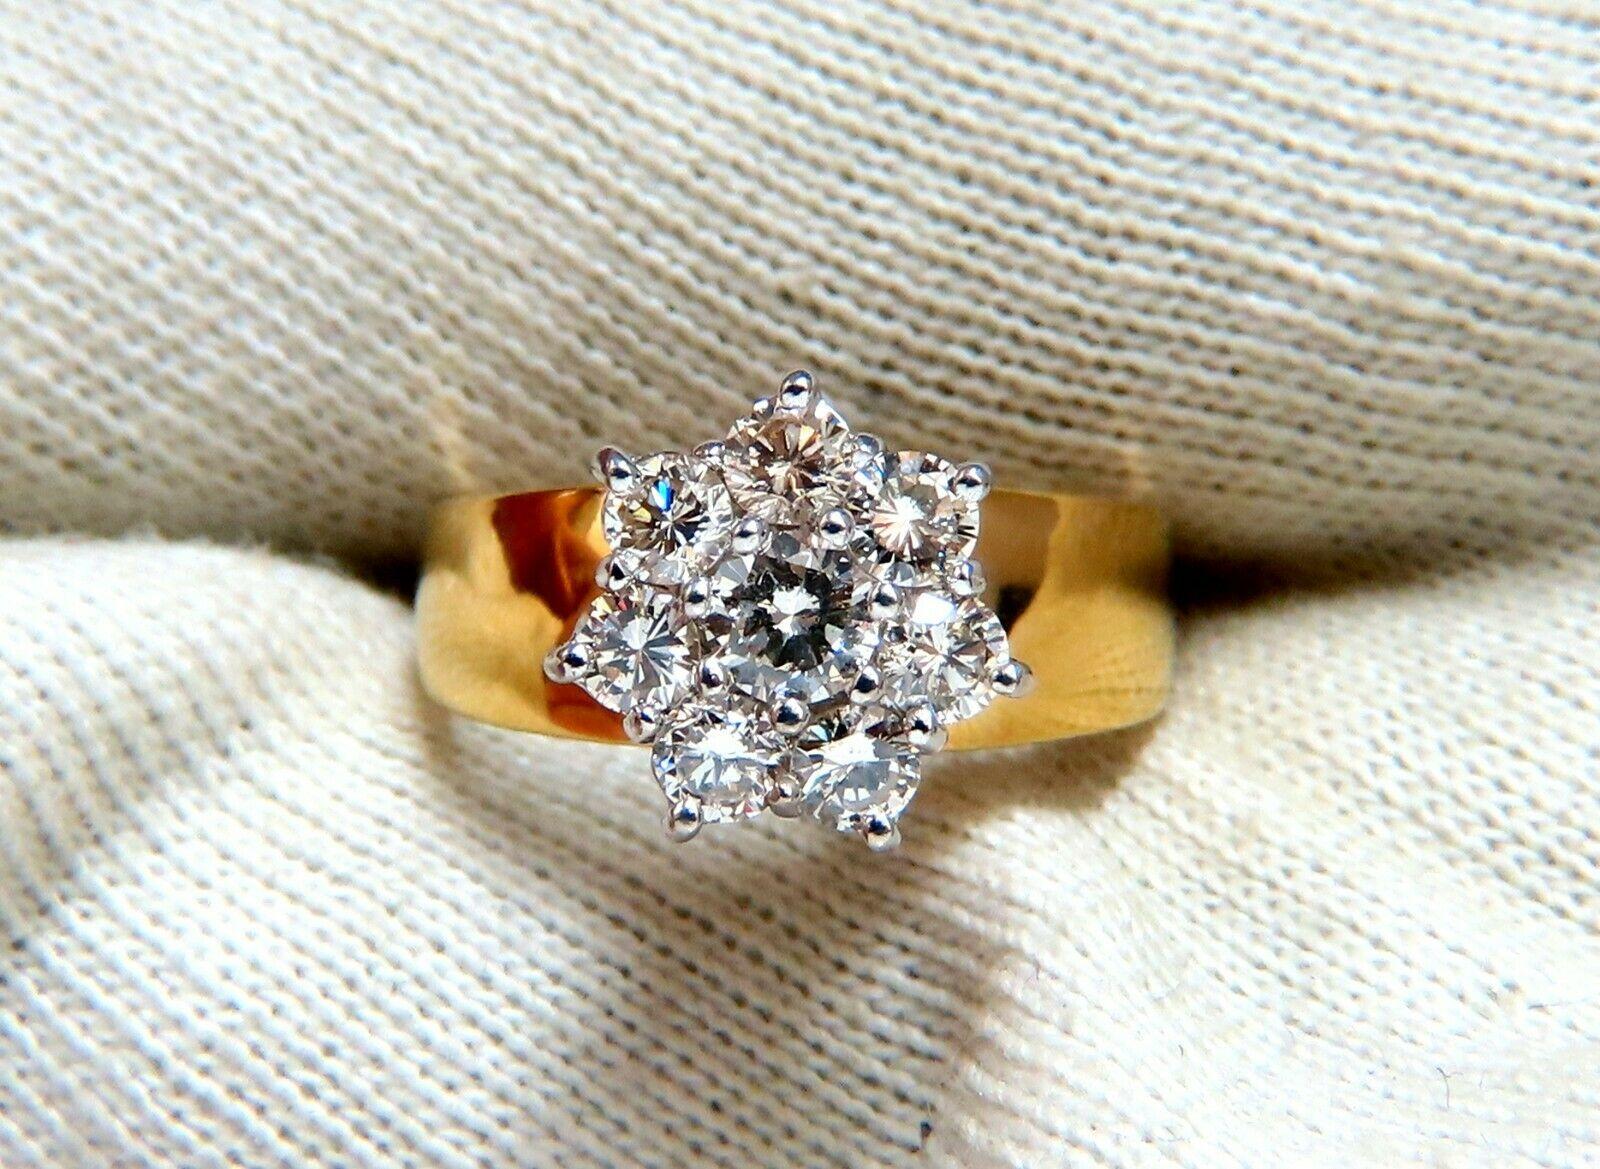 Floating Cluster on Band

1.04ct Round diamond cluster ring.

Diamonds: Si-1 clarity, I-J color.

Cluster: 11mm diameter.

Depth of ring 9.7mm

8 diamonds in total with larger middle diamond.

Size 6.5 and can be sized free.

4.4 grams.

$4000